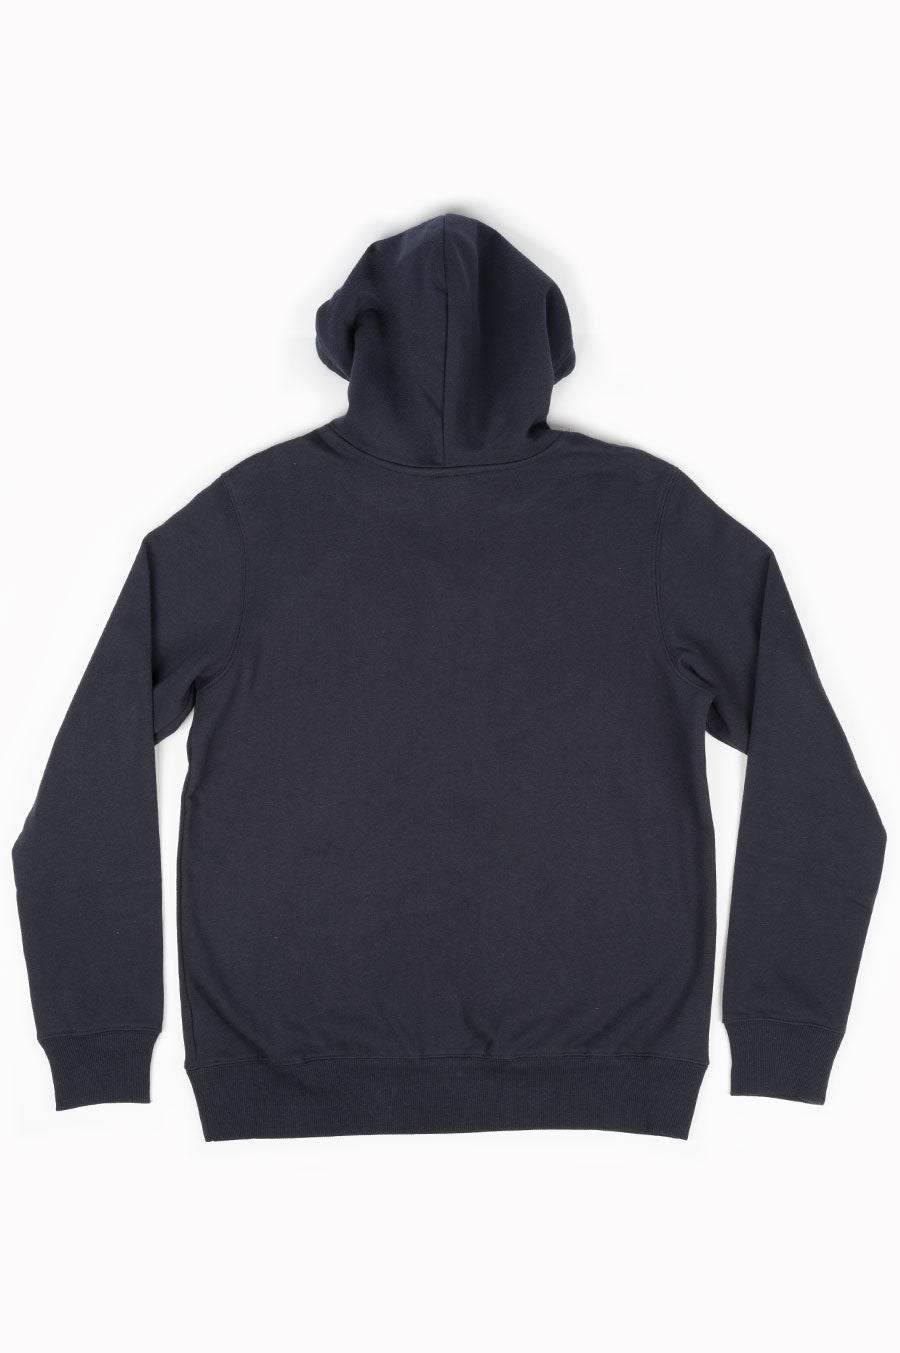 THE NORTH FACE HALF DOME PULLOVER HOODIE AVIATOR NAVY – BLENDS